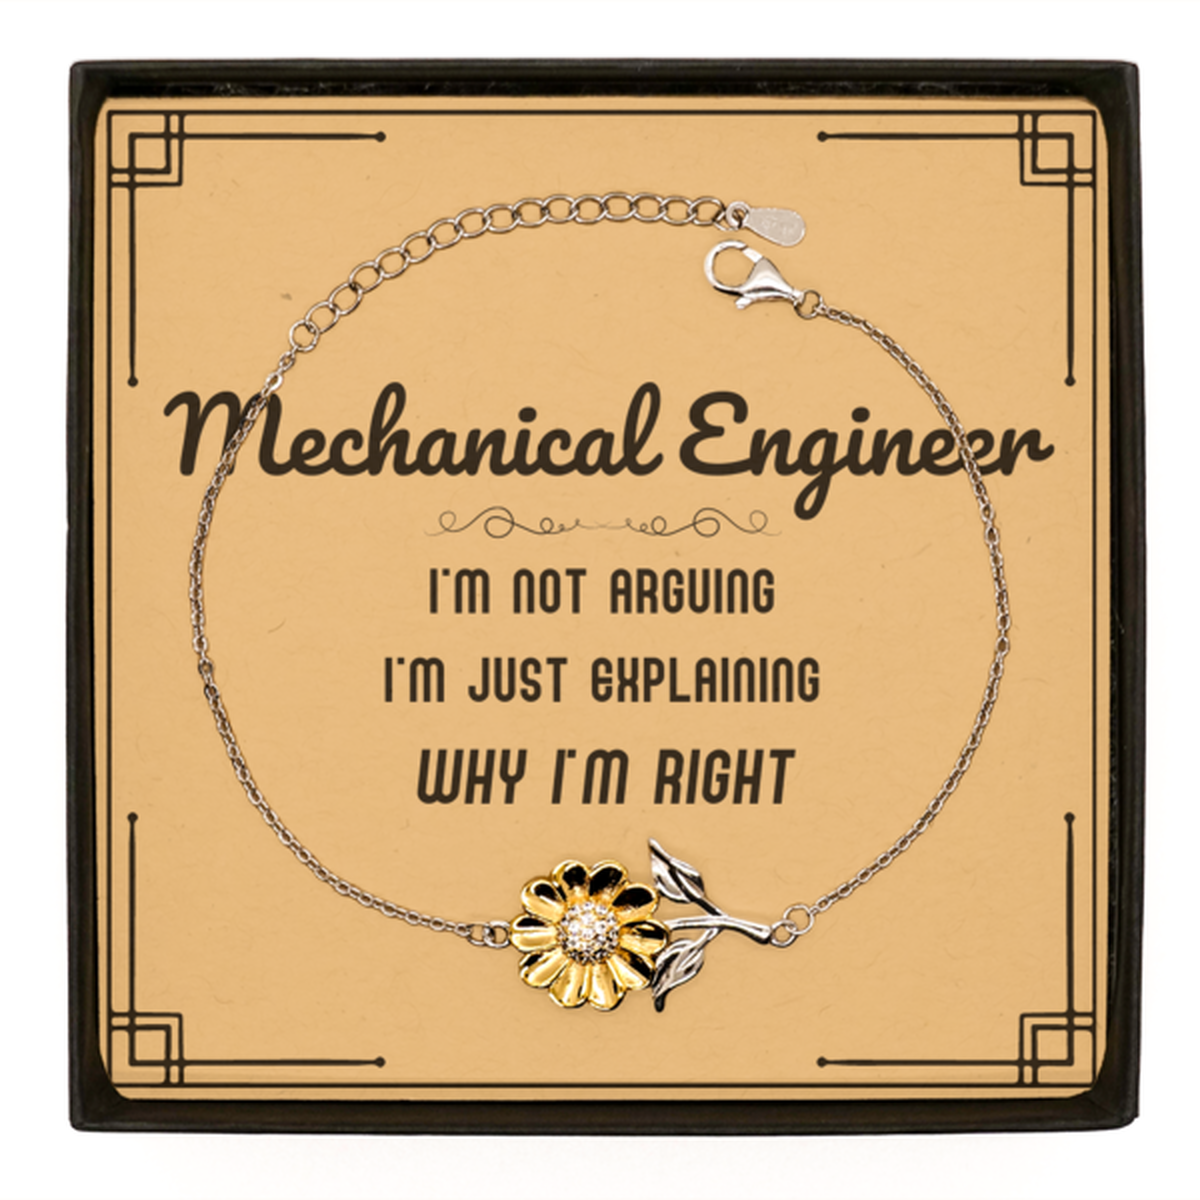 Mechanical Engineer I'm not Arguing. I'm Just Explaining Why I'm RIGHT Sunflower Bracelet, Funny Saying Quote Mechanical Engineer Gifts For Mechanical Engineer Message Card Graduation Birthday Christmas Gifts for Men Women Coworker